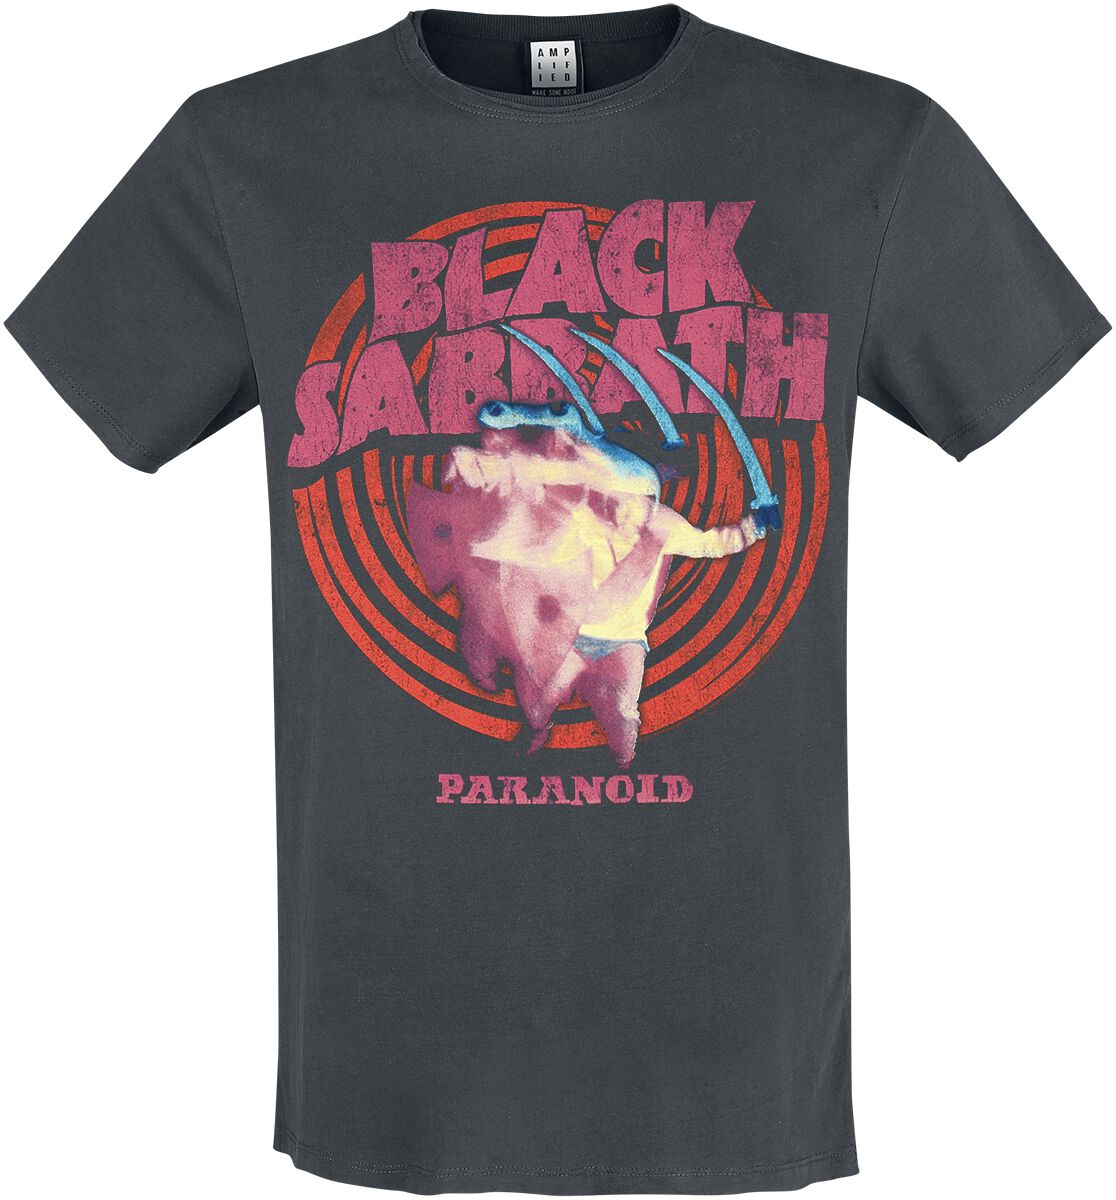 Image of Black Sabbath Amplified Collection - Paranoid T-Shirt charcoal